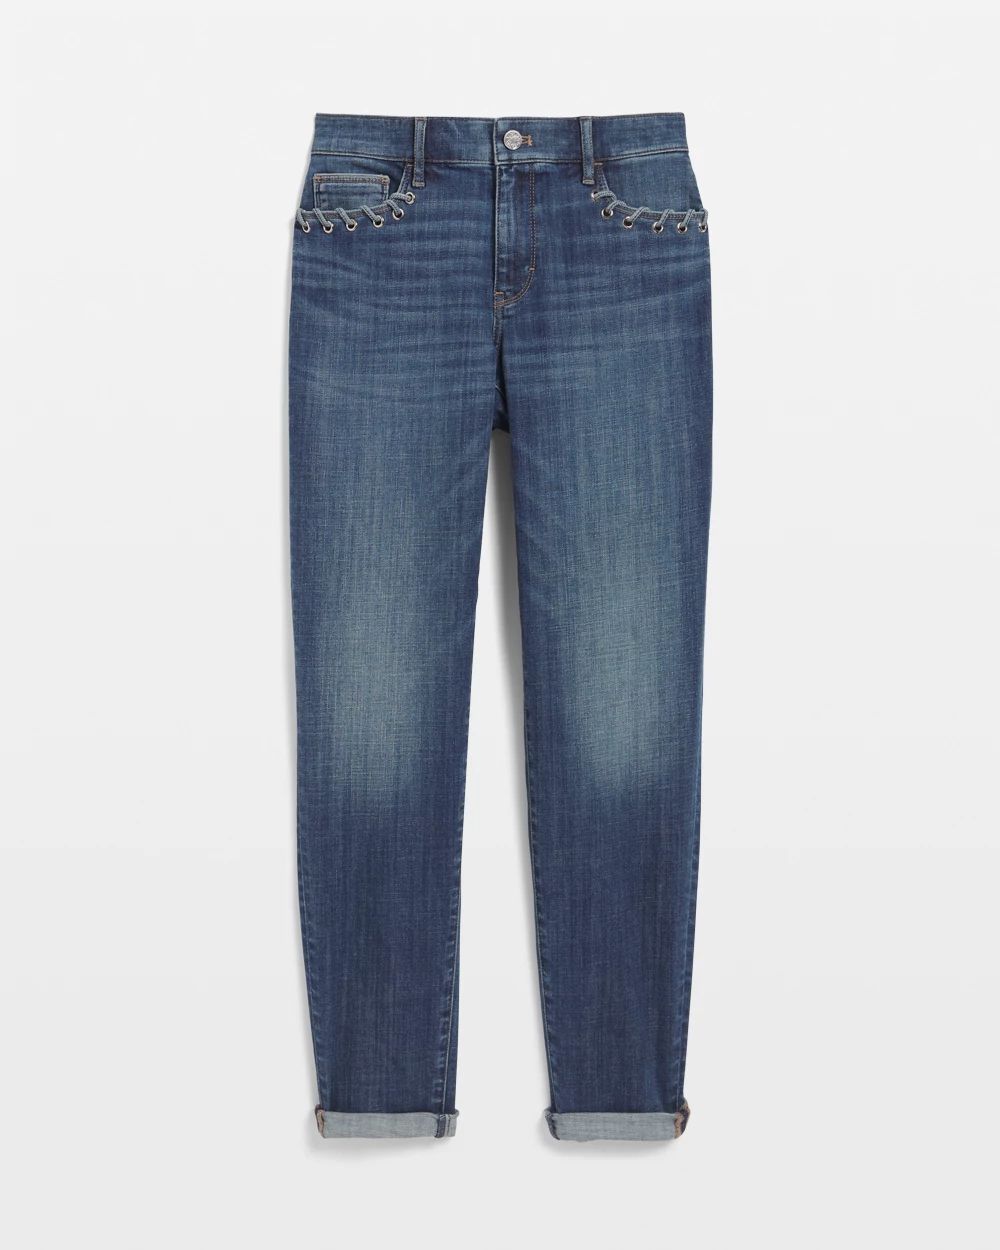 Mid-Rise Everyday Soft Denim  Grommet Girlfriend Jean click to view larger image.